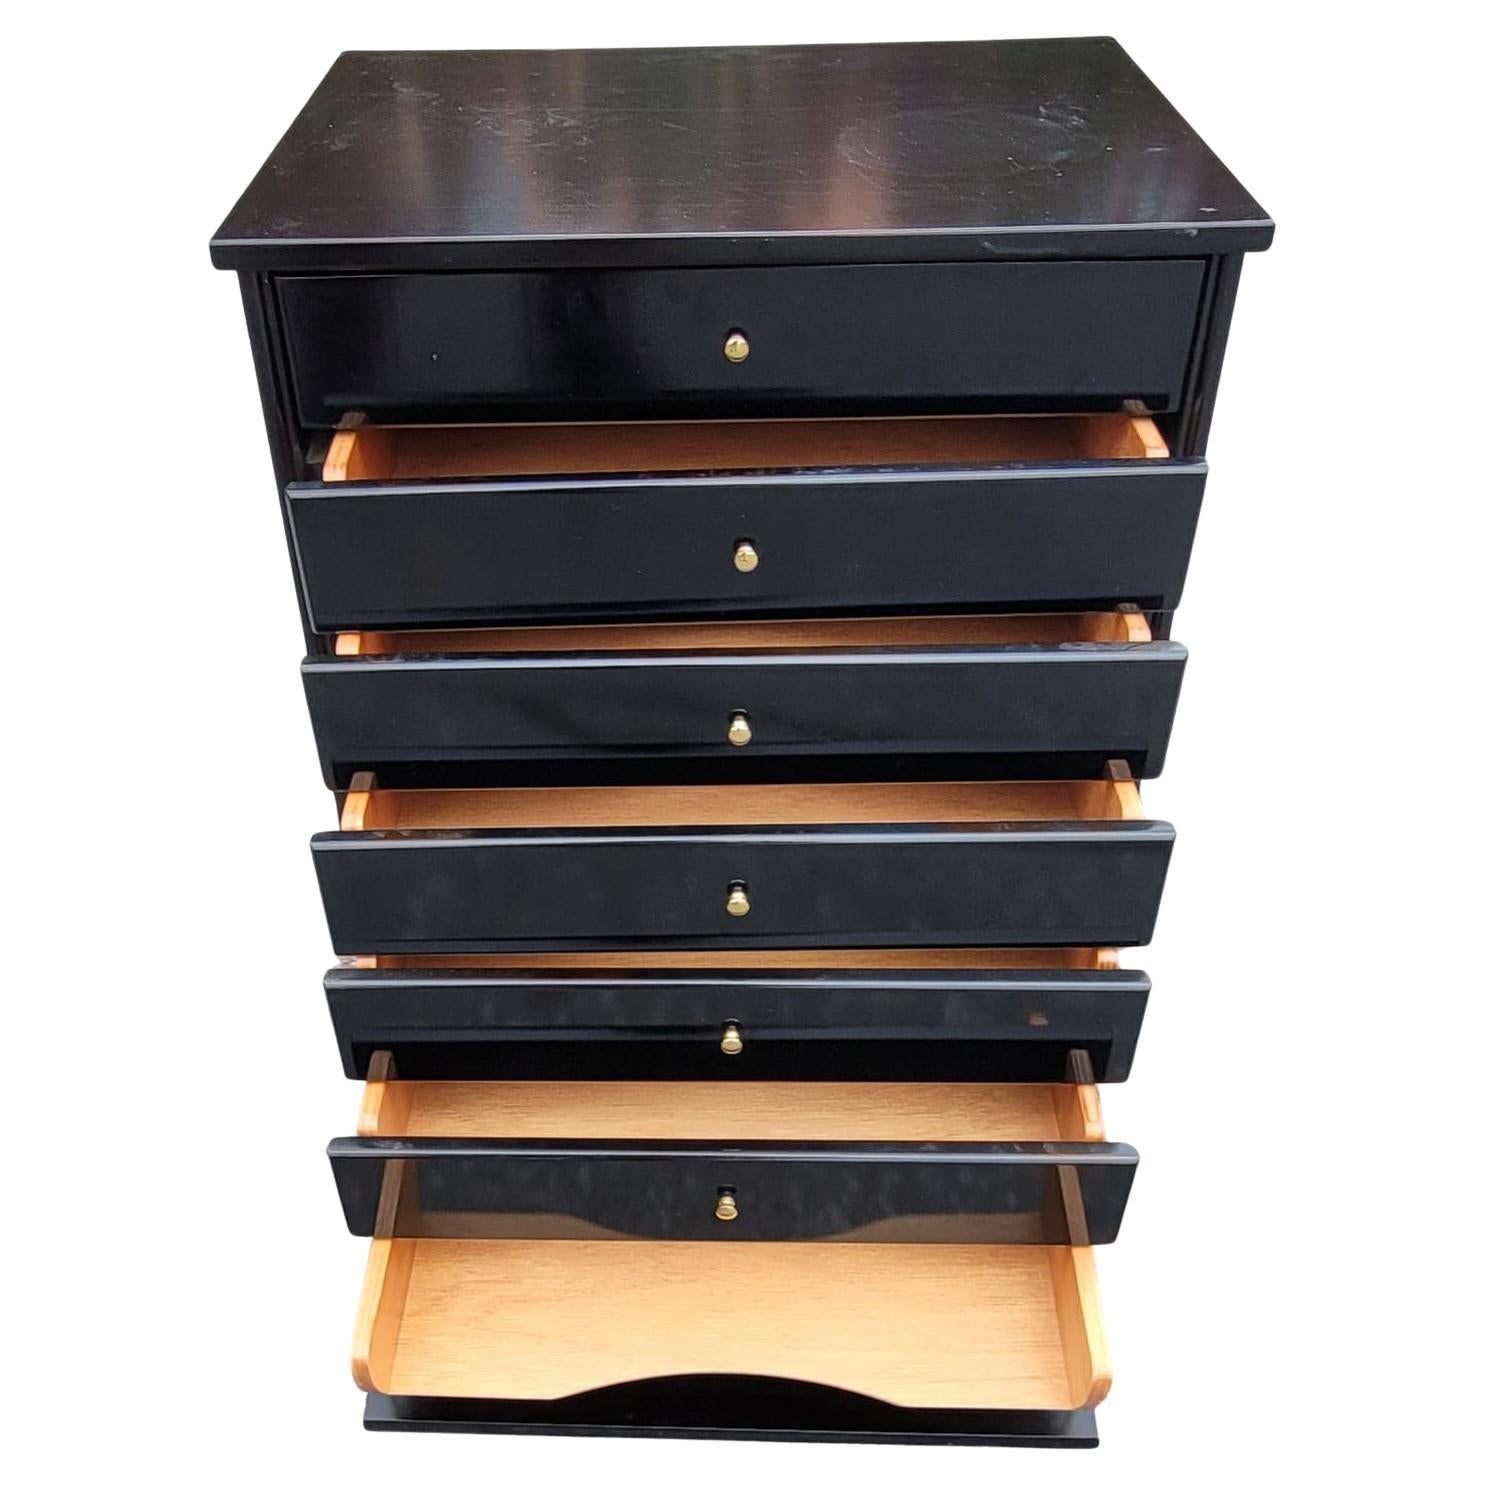 A John Austin Ebonized 7-Drawer Wood Prints or Music Sheets Cabinets in excellent condition.
Measures 20.1